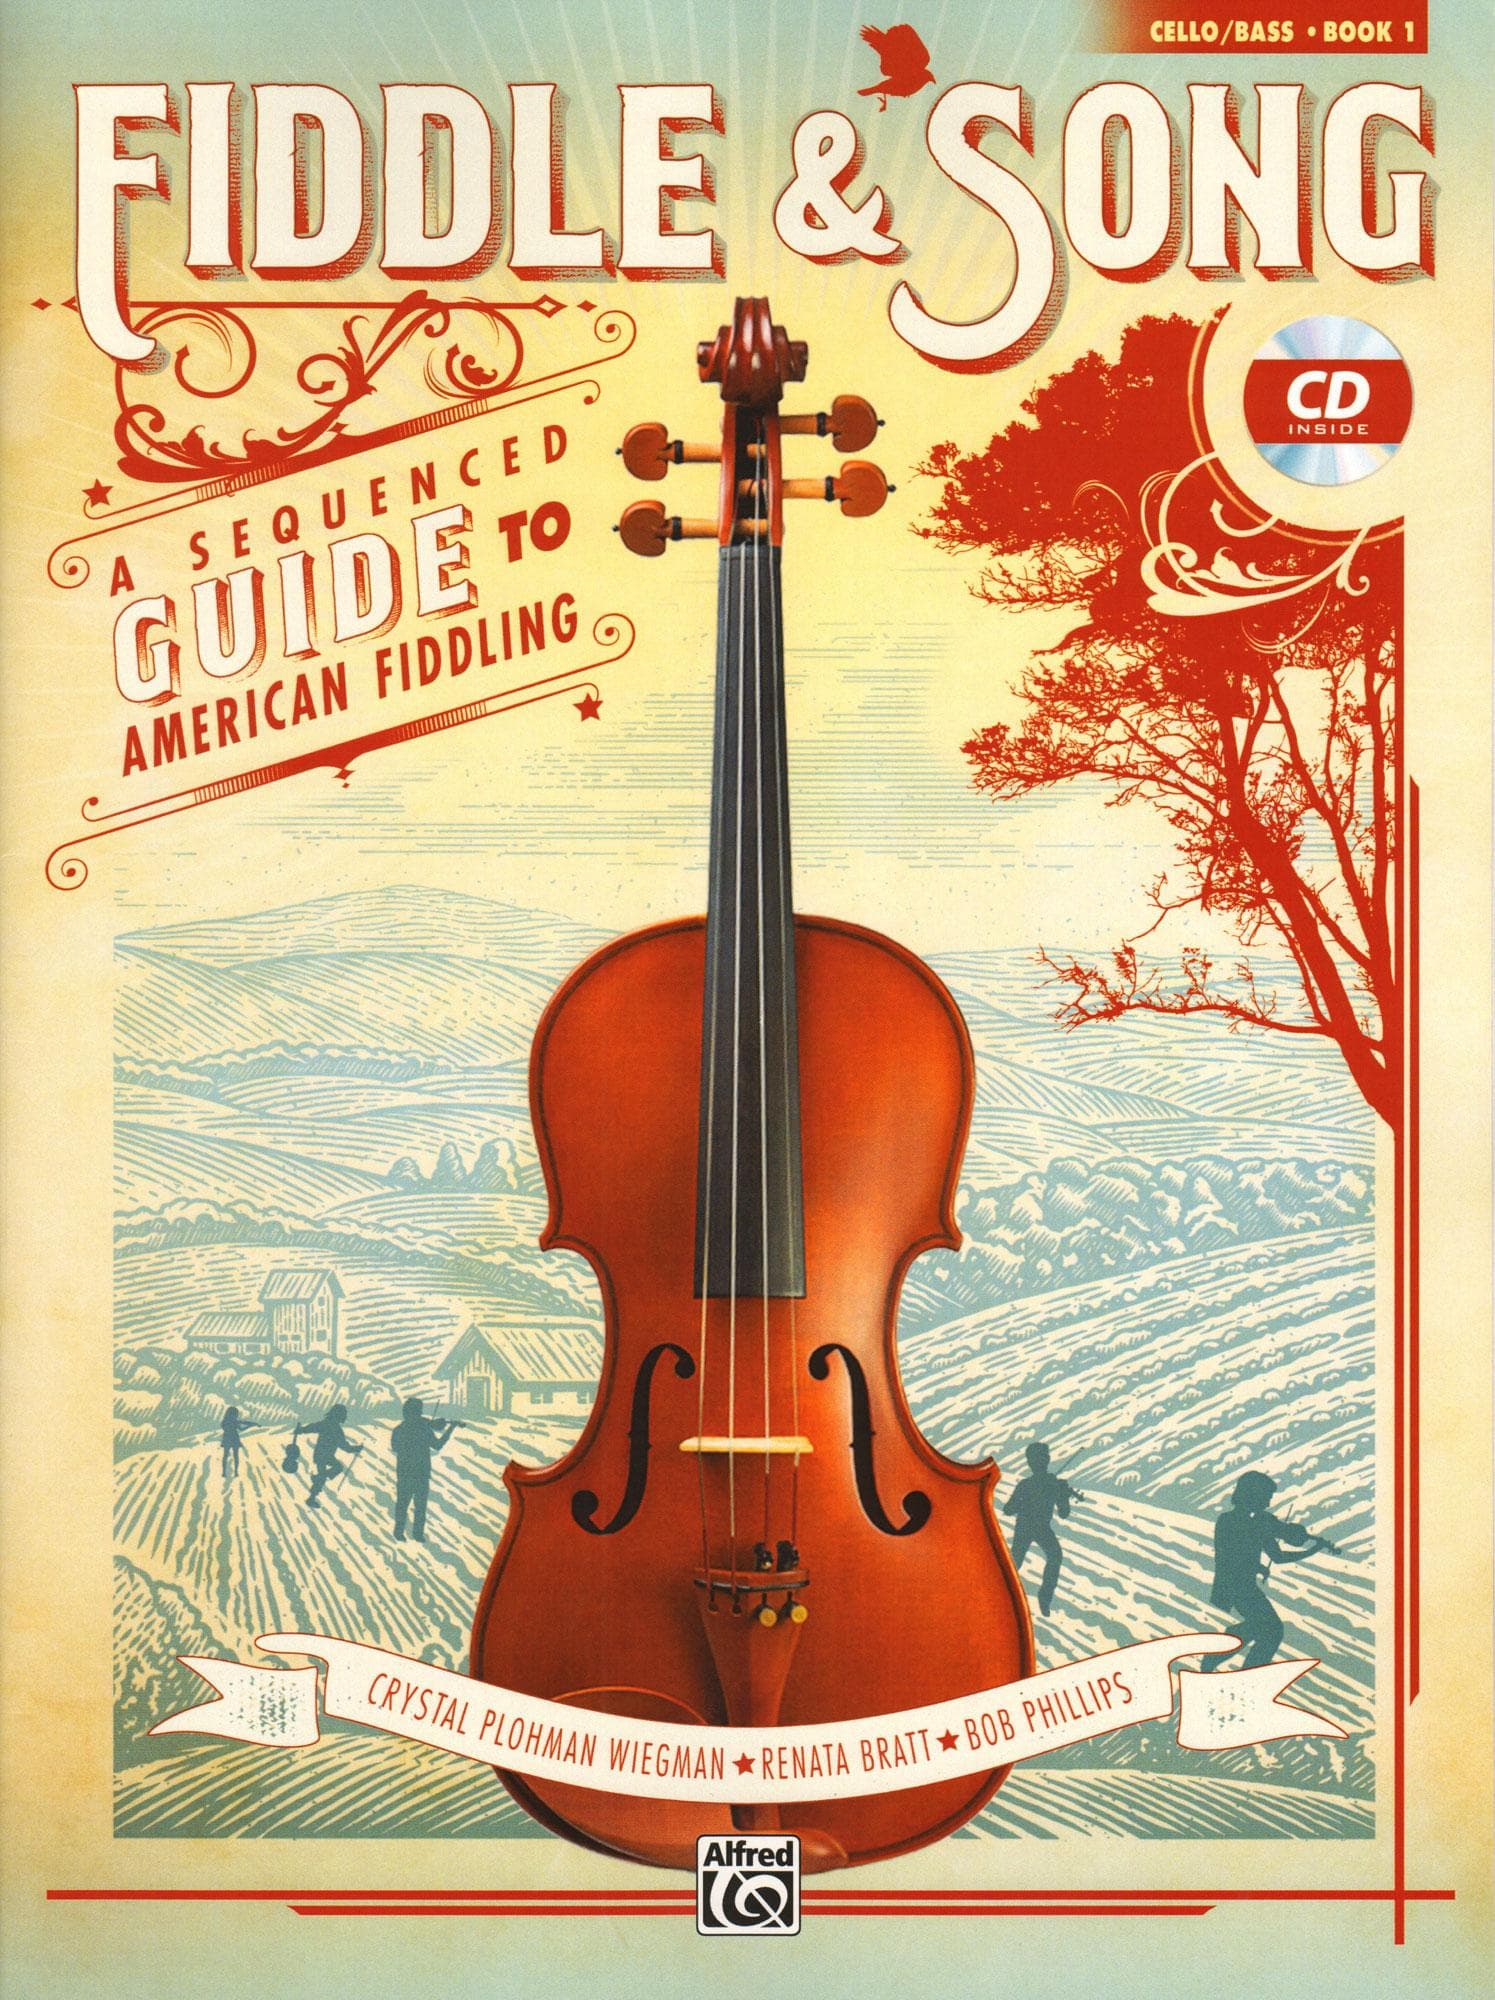 Fiddle & Song - A Sequenced Guide to American Fiddling - by Wiegman, Bratt, and Phillips - Cello/Bass Book 1 - Alfred Publishing